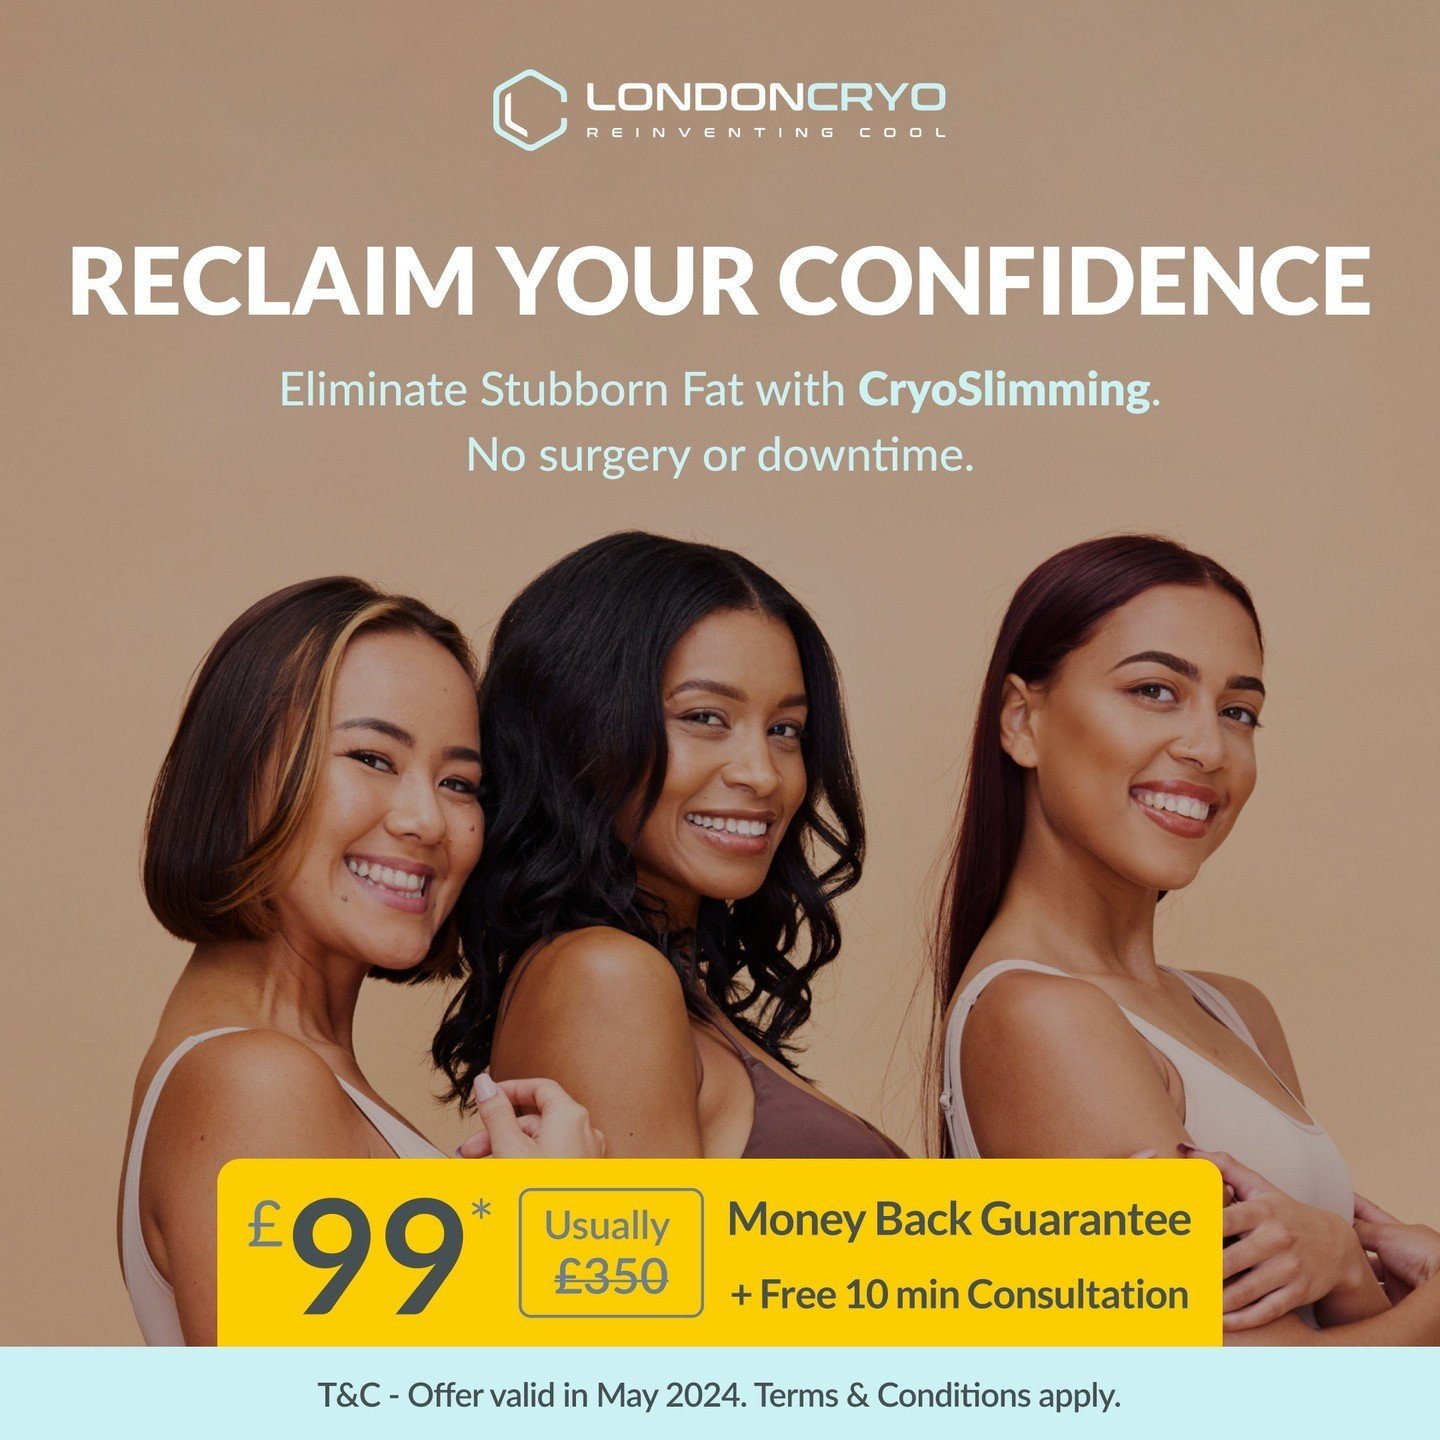 Ready to reclaim your confidence? Say goodbye to stubborn fat with CryoSlimming! ❄️✨⁠
⁠
Now just &pound;99, usually &pound;350, with a money-back guarantee and free 10-min consultation included! Don't miss out on this limited-time offer to sculpt you